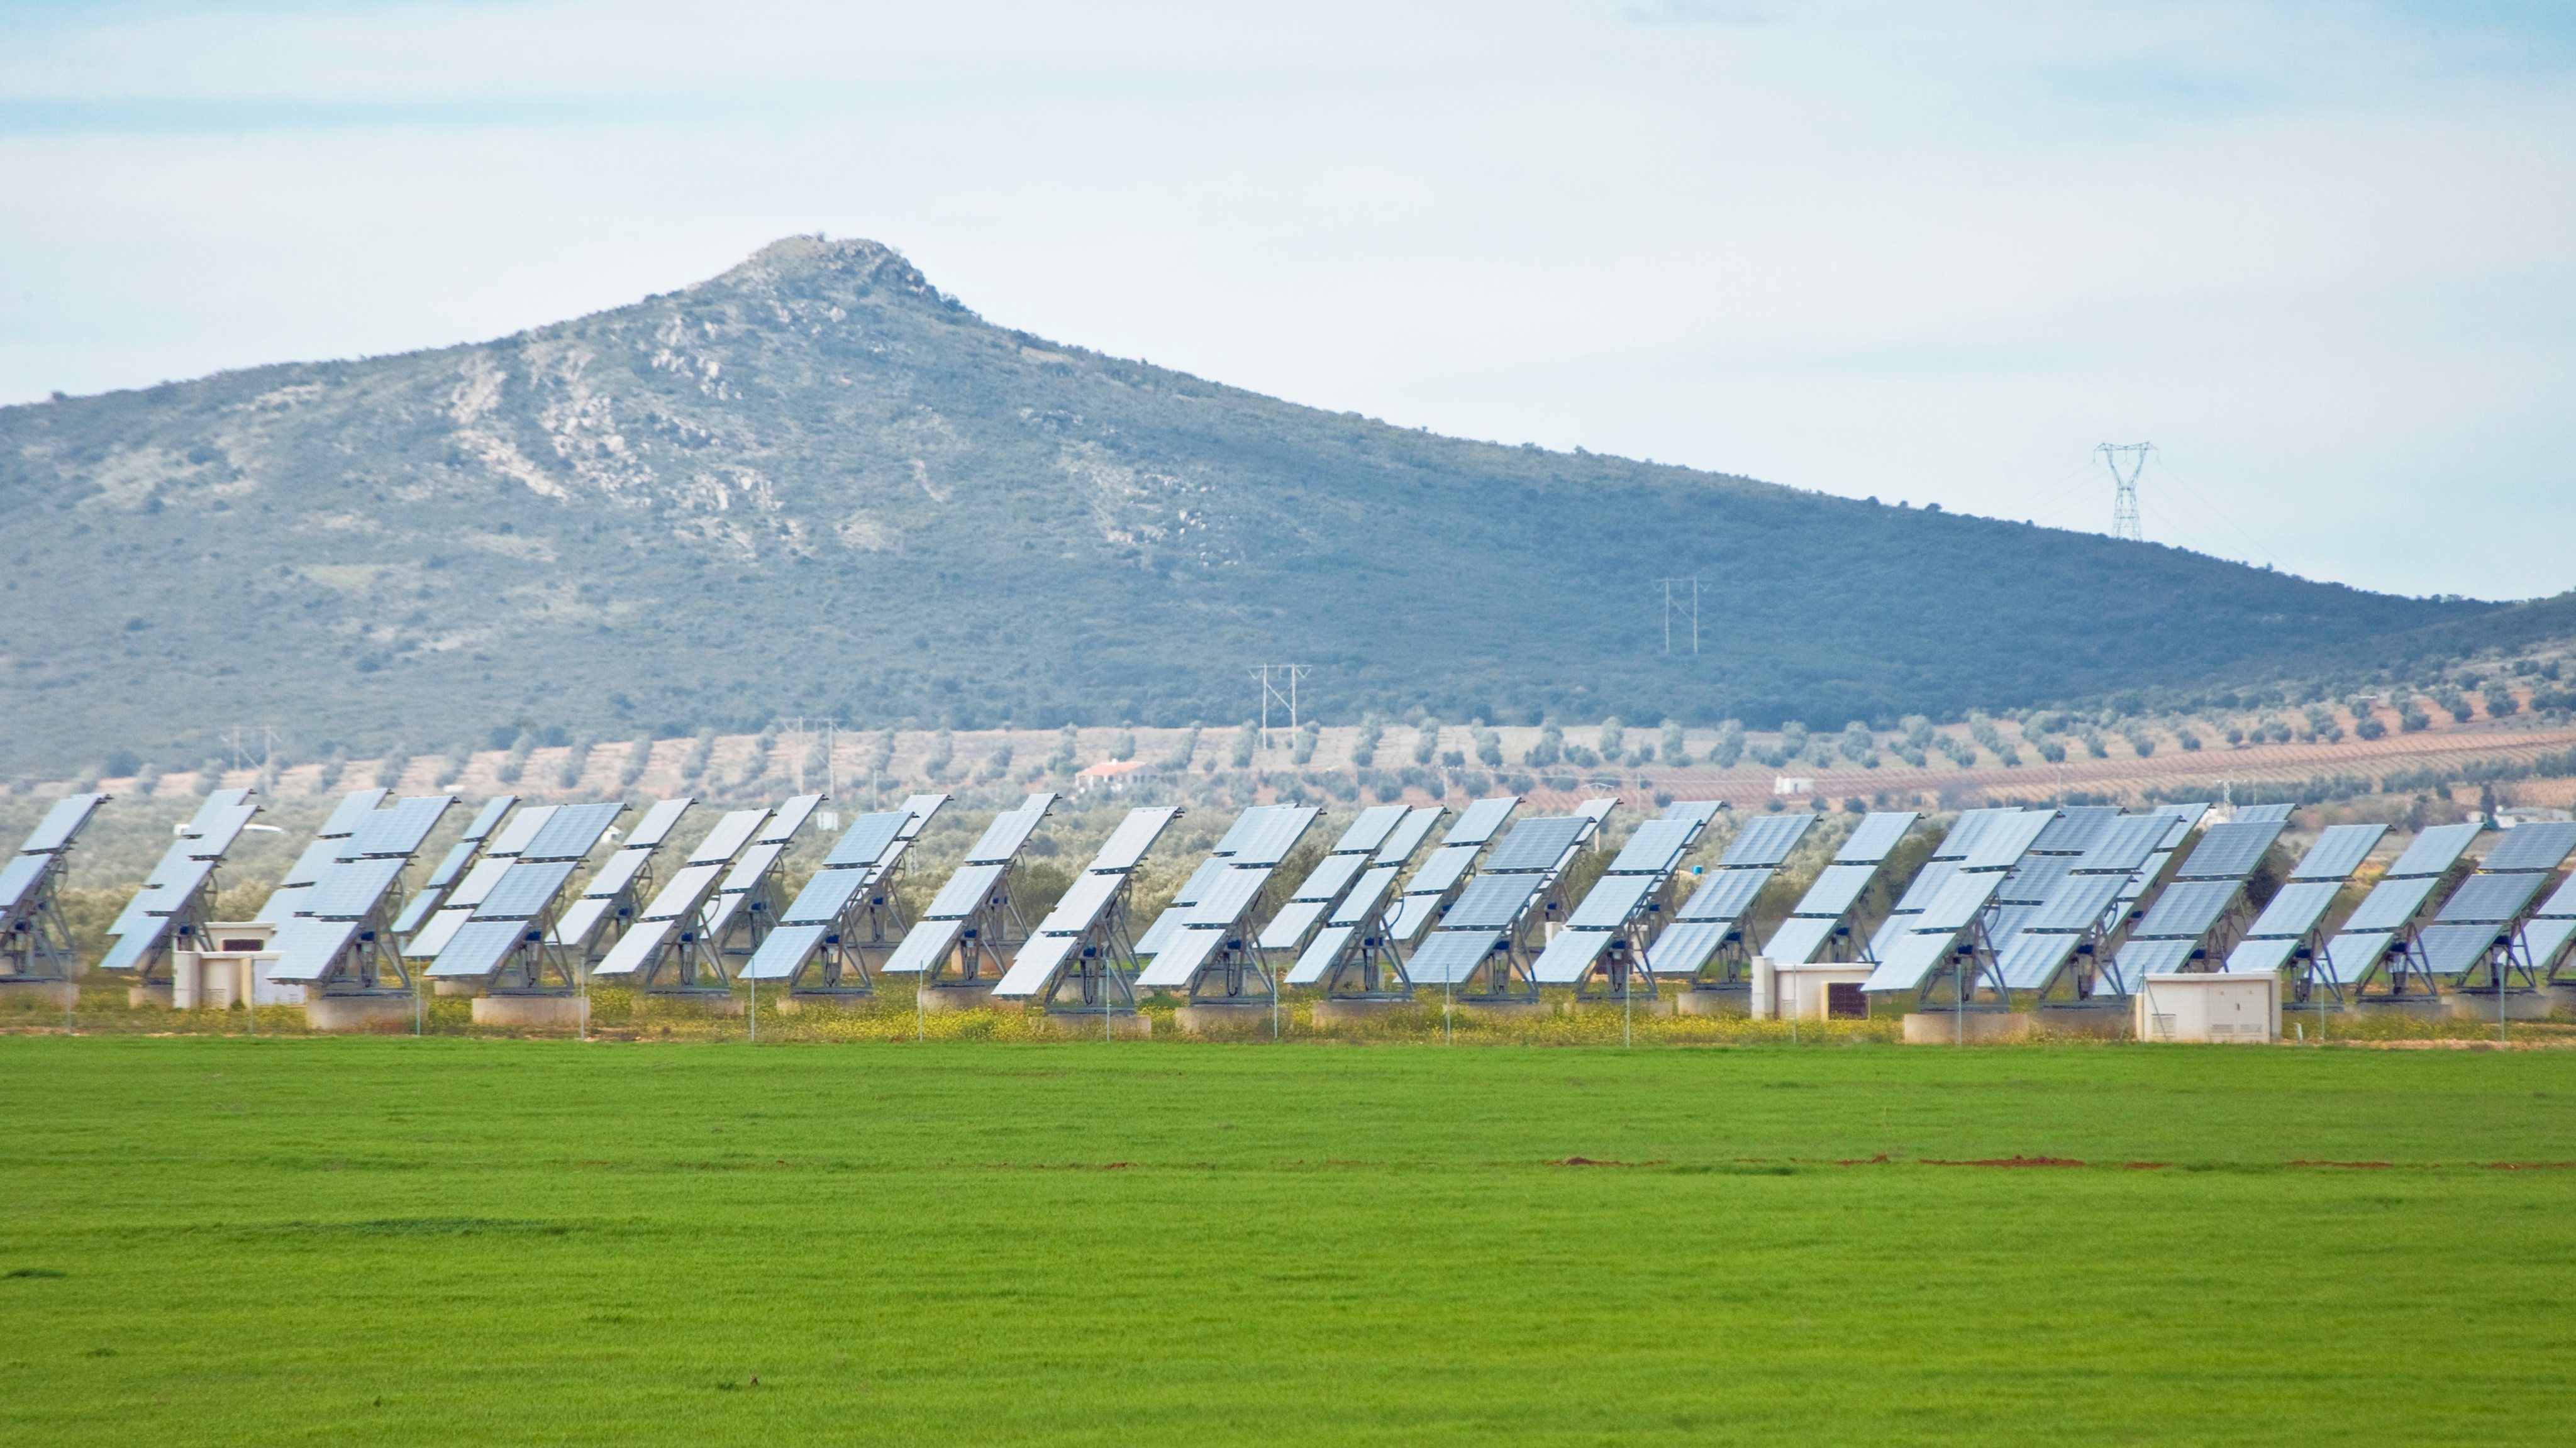 Array of Solar Panels in Southern Spain, between Madrid and Granada